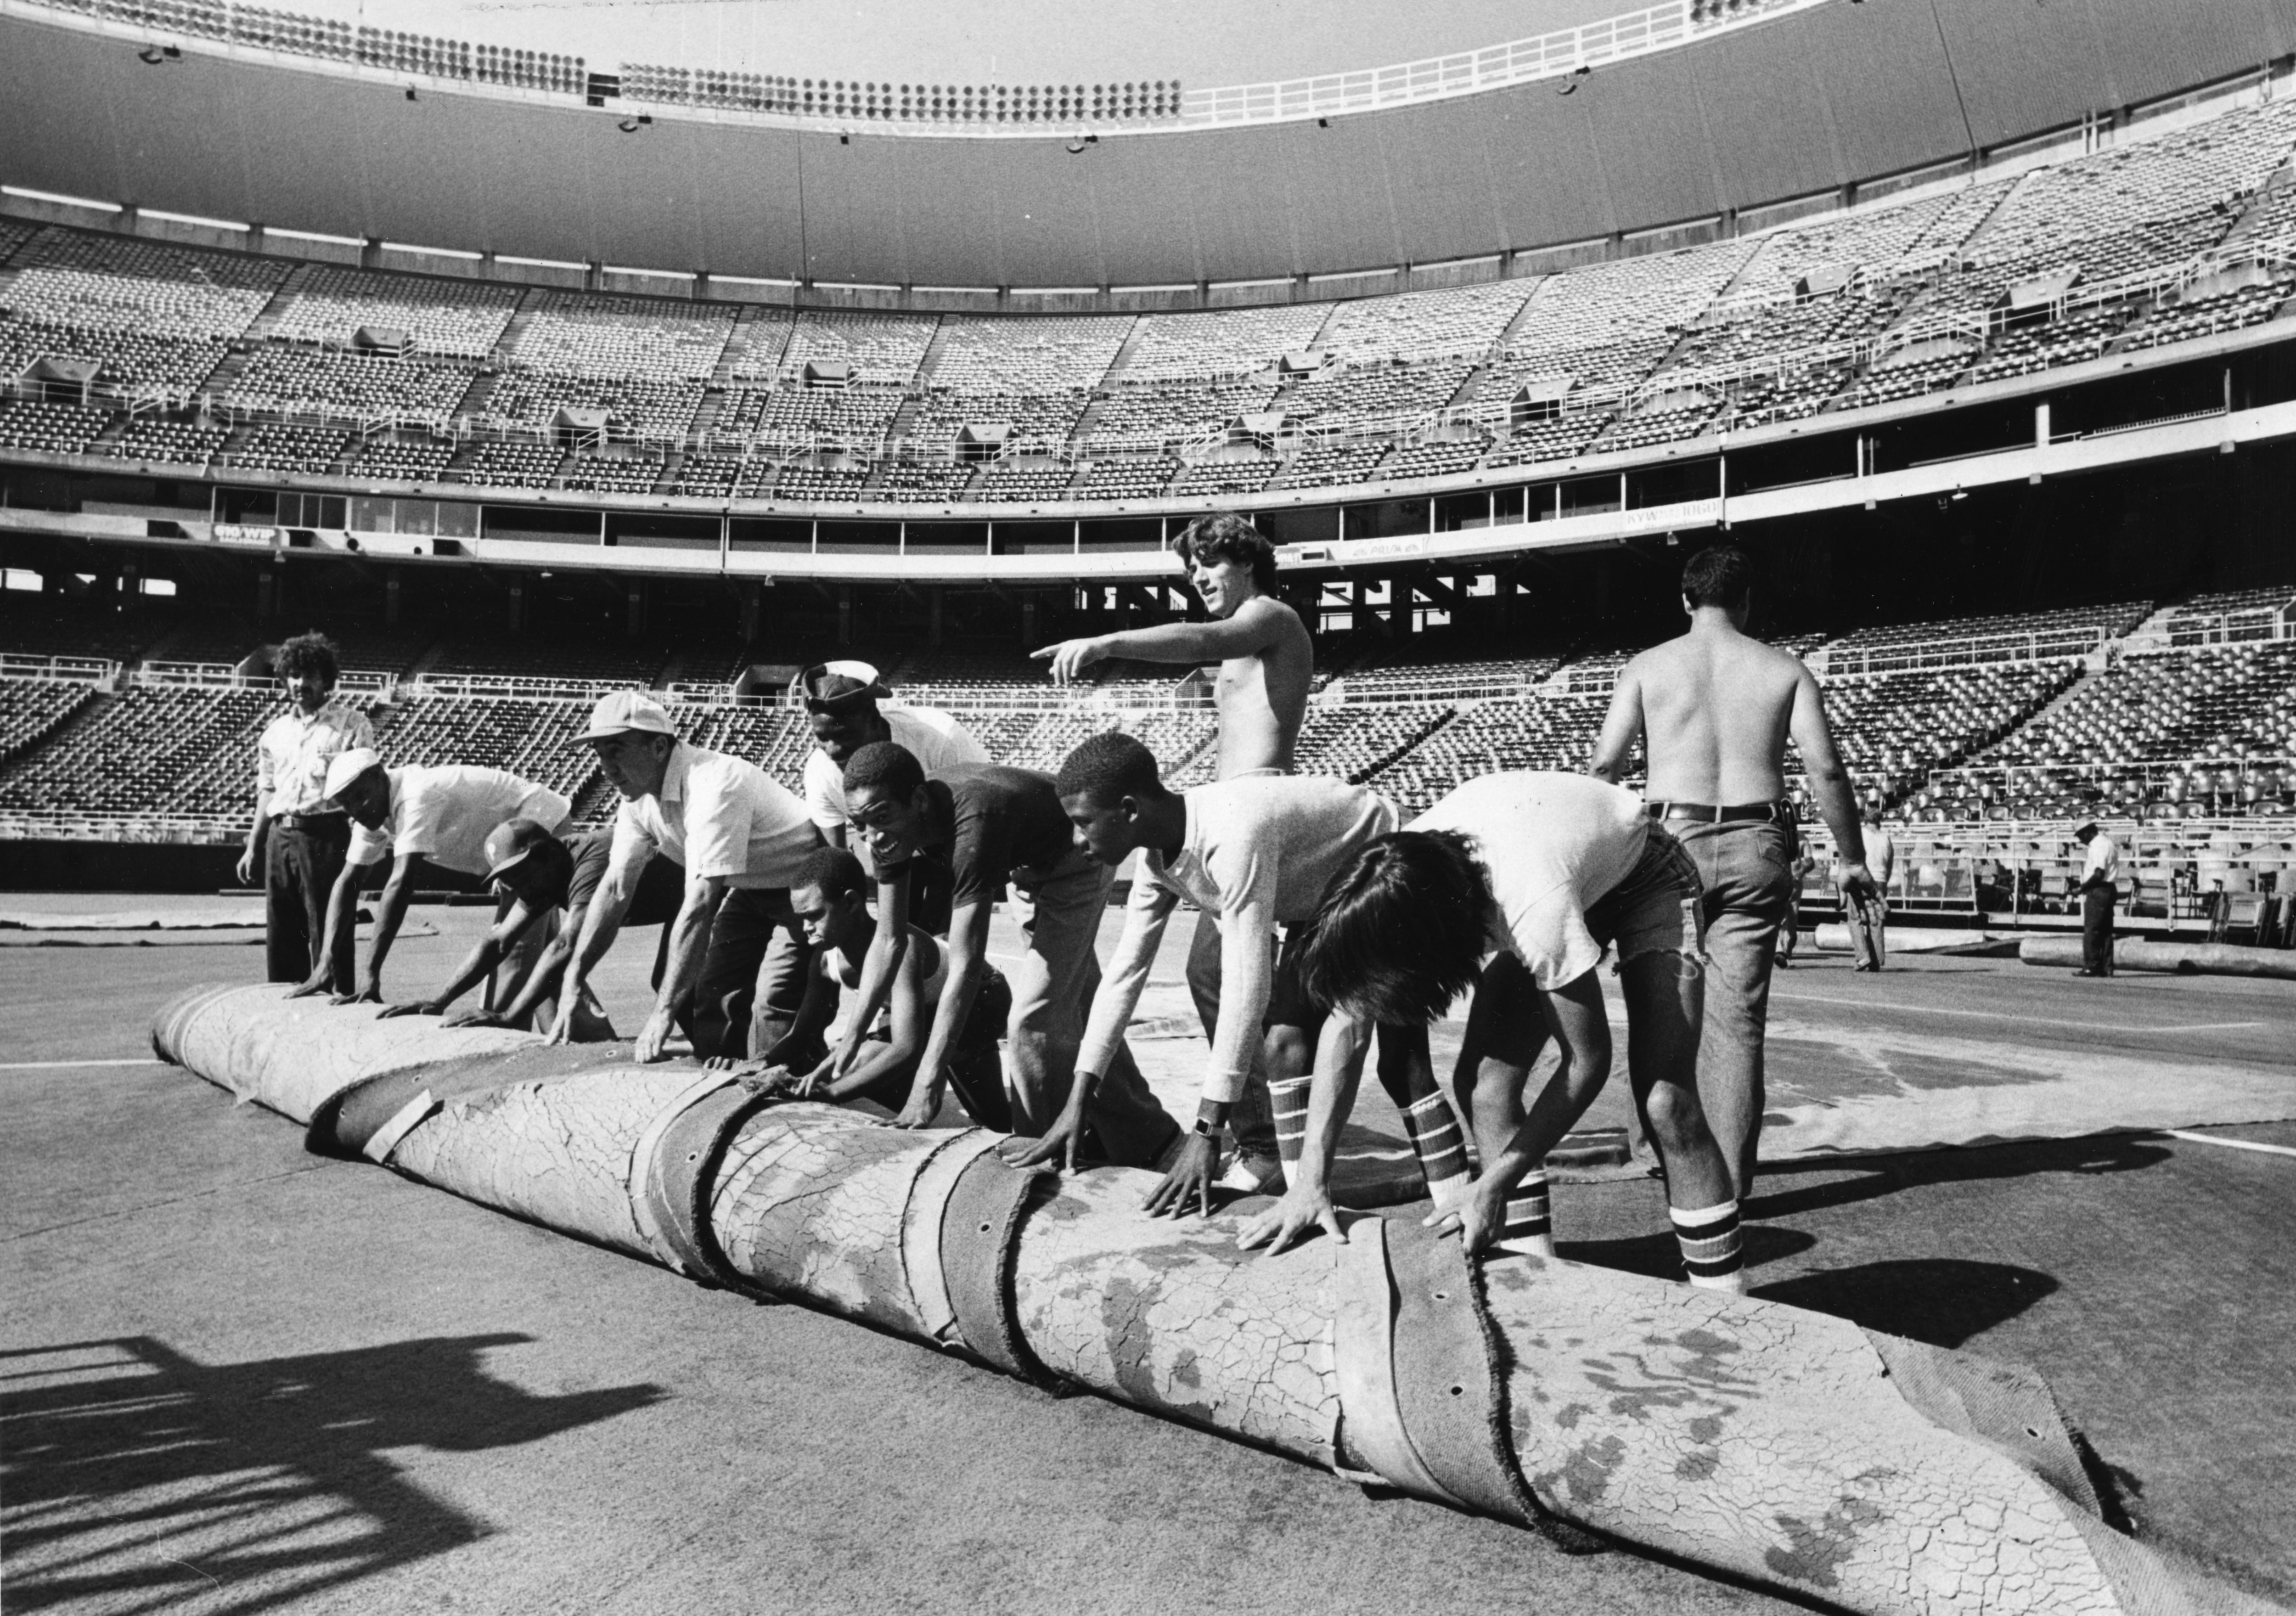 King George at Royals Stadium in the early 80's.